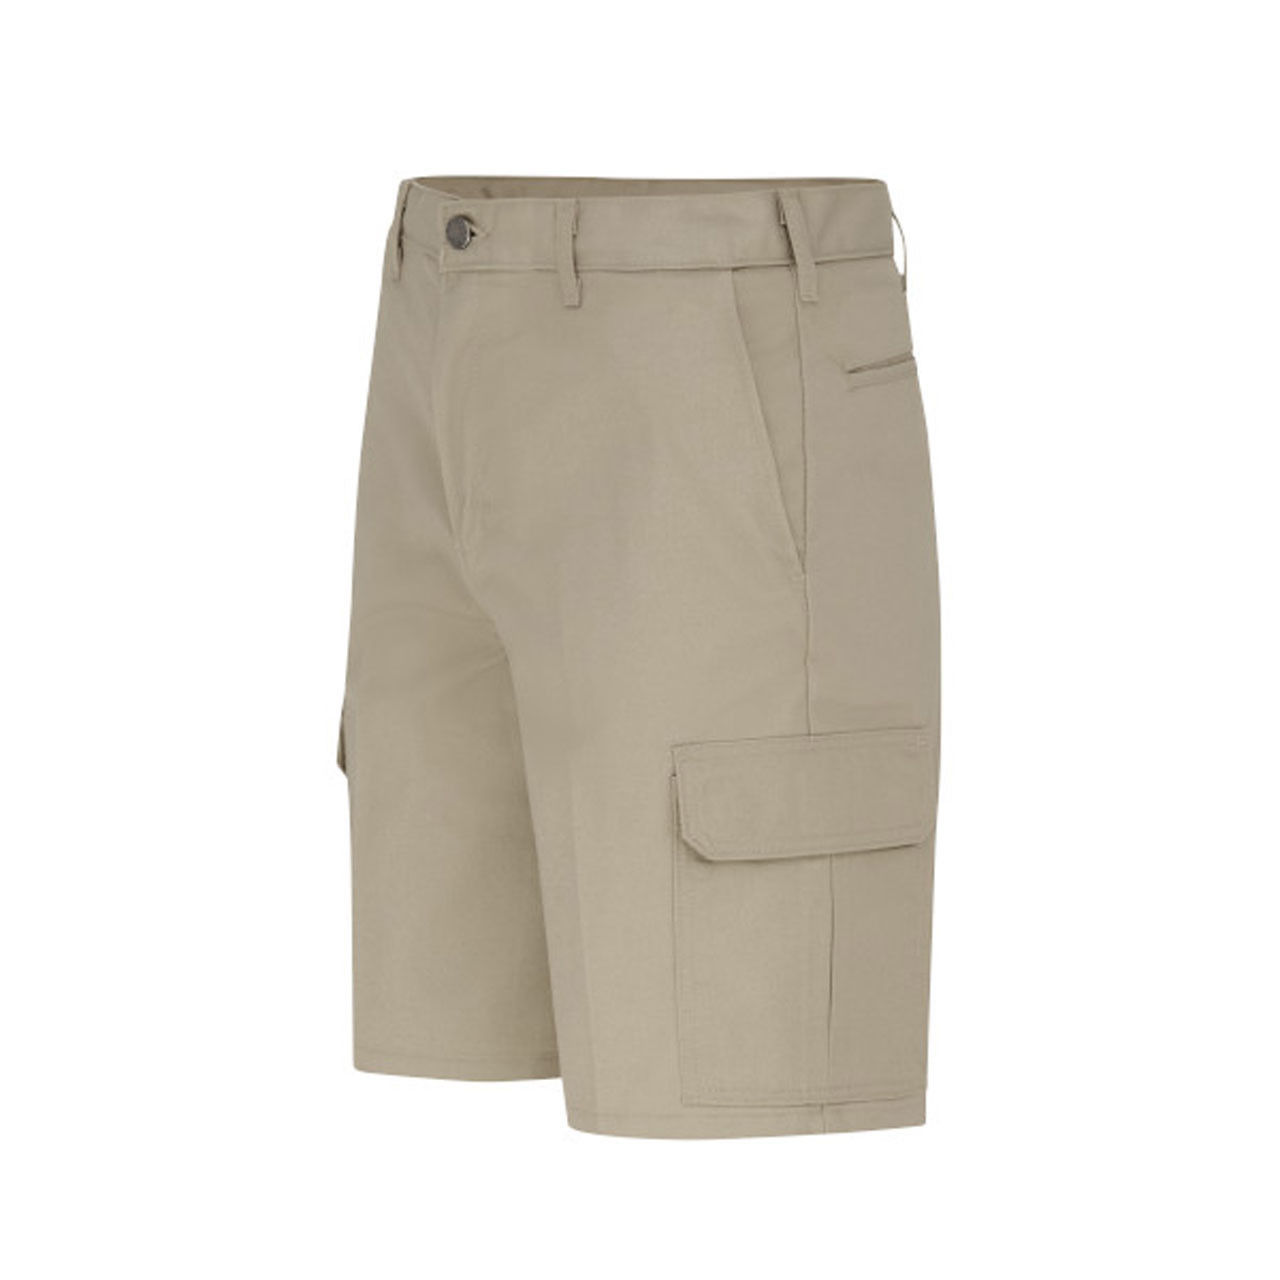 What are the features of Dickies Industrial Cargo Short - LR00 dickies cargo shorts?